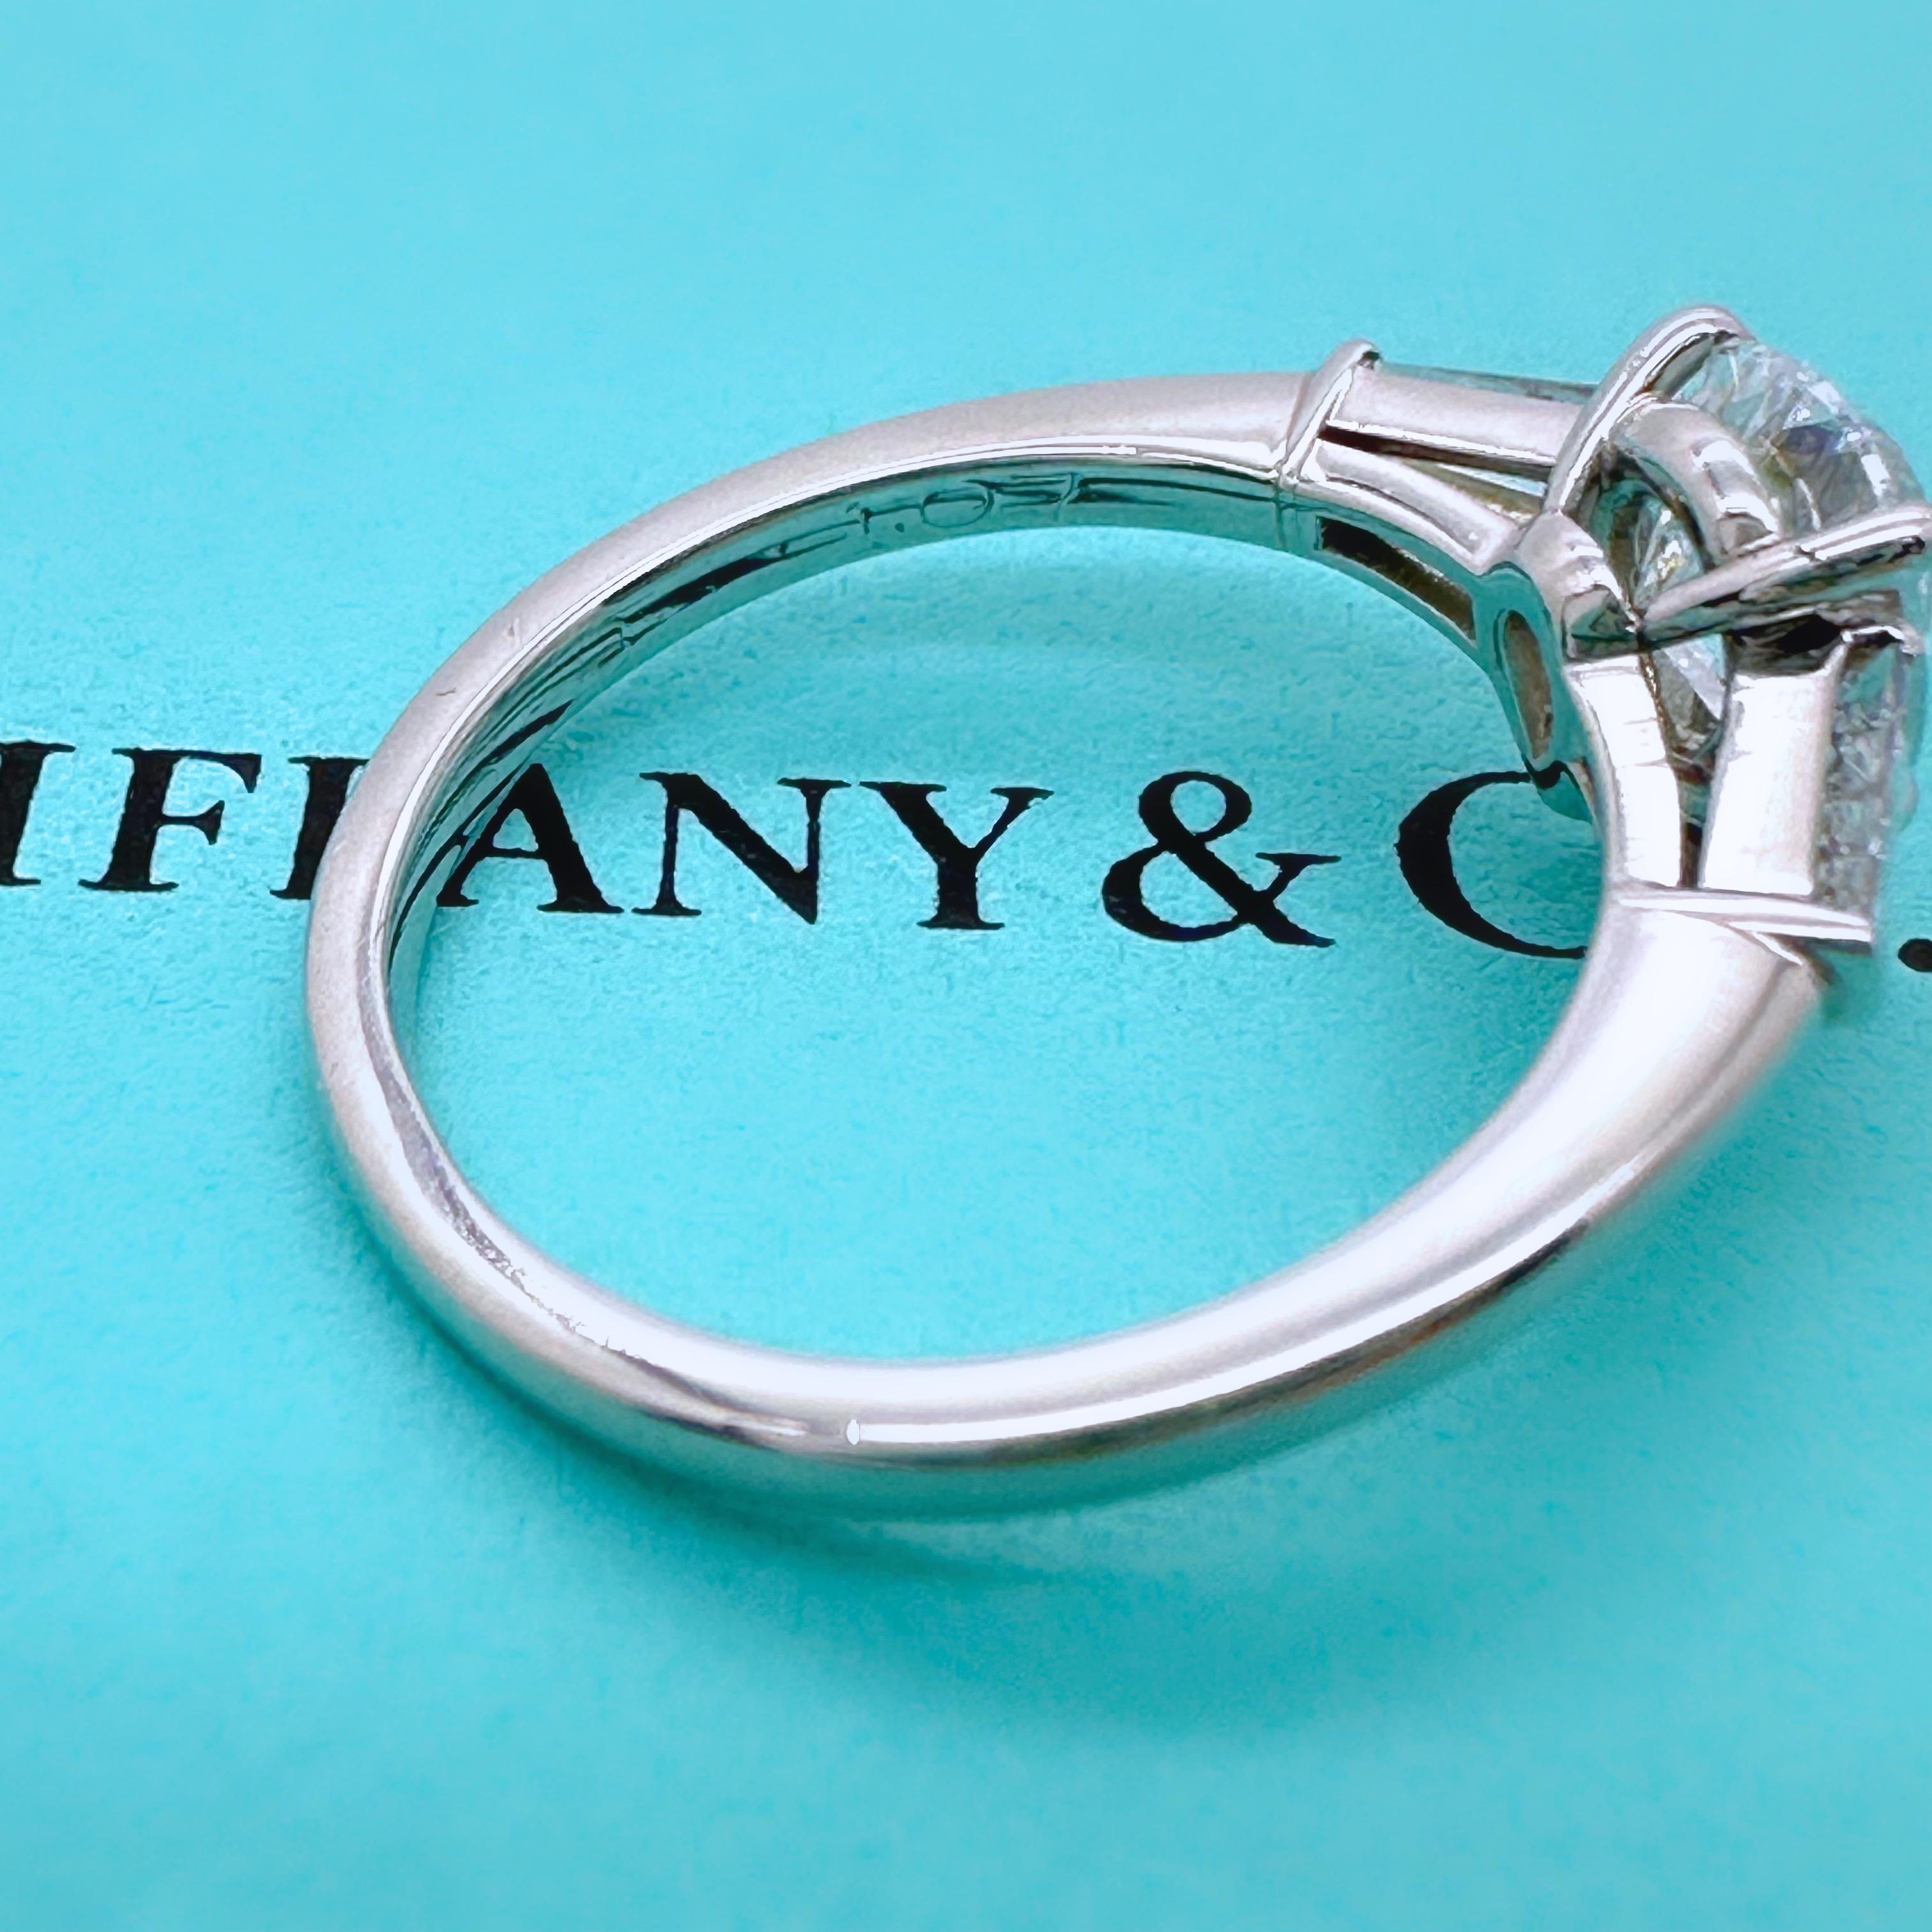 Tiffany & Co. Pear Diamond 1.07 D VS2 with Baguette Side Stones Engagement Ring For Sale 2